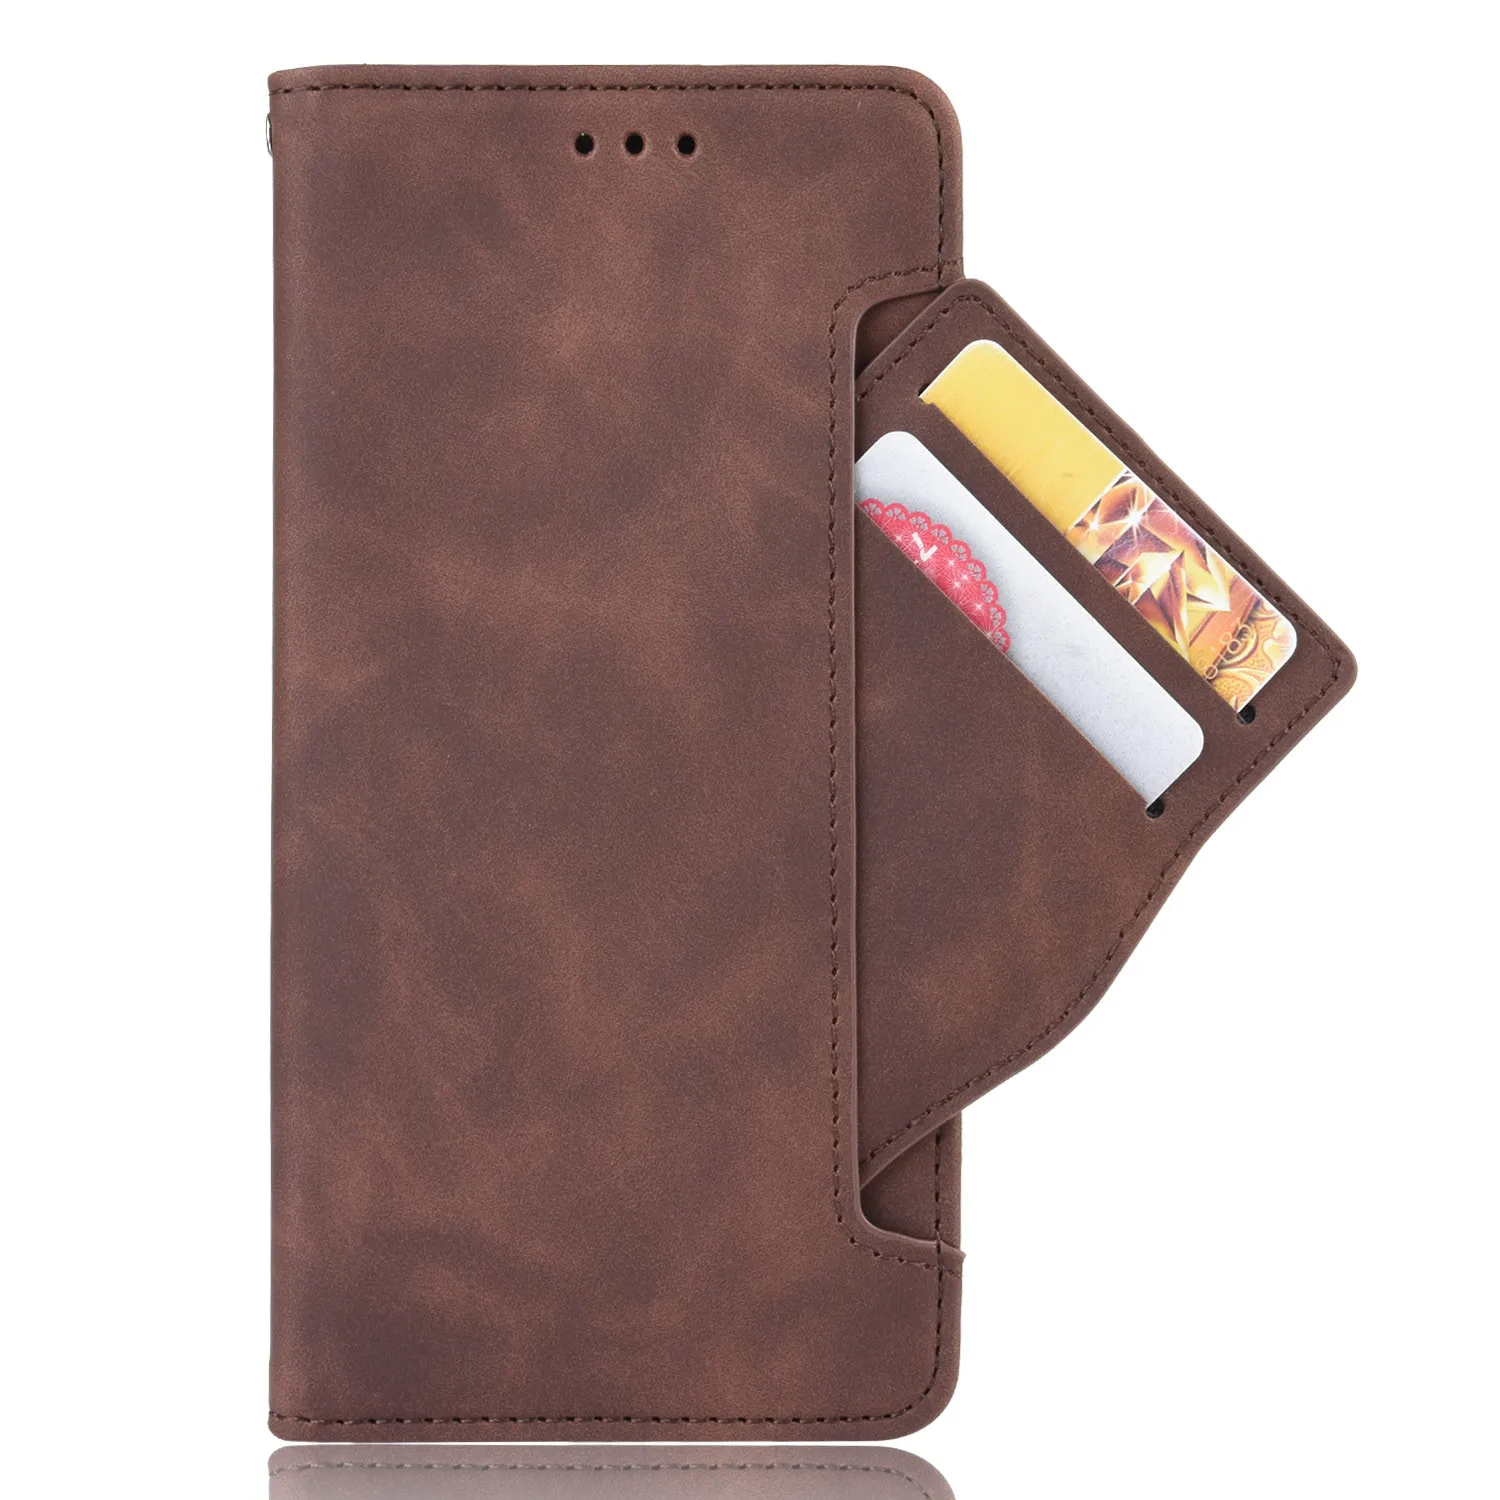 For Honor 10 Lite Case Premium Leather Wallet Leather Flip Multi-card slot Cover For Huawei Honor 10 Lite HRY-LX1 10Lite Case pu case for huawei